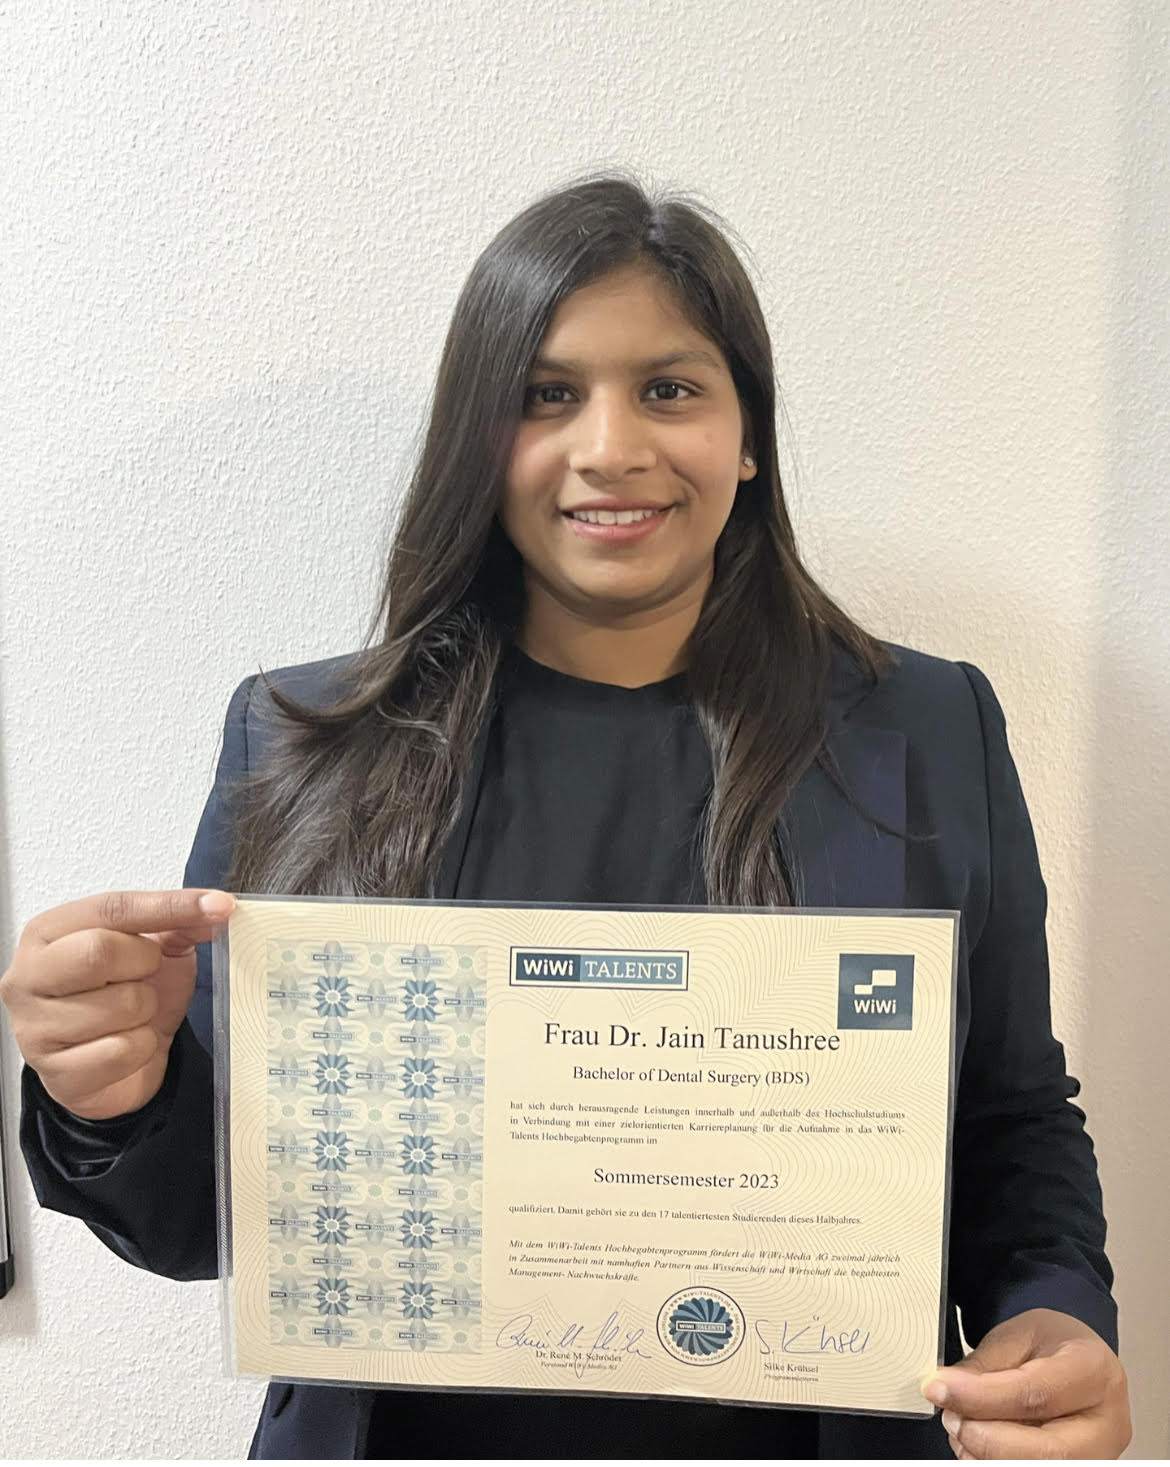 Tanushree Jain, MBA student at Munich Business School, with their certificate for the WiWi-Talents program